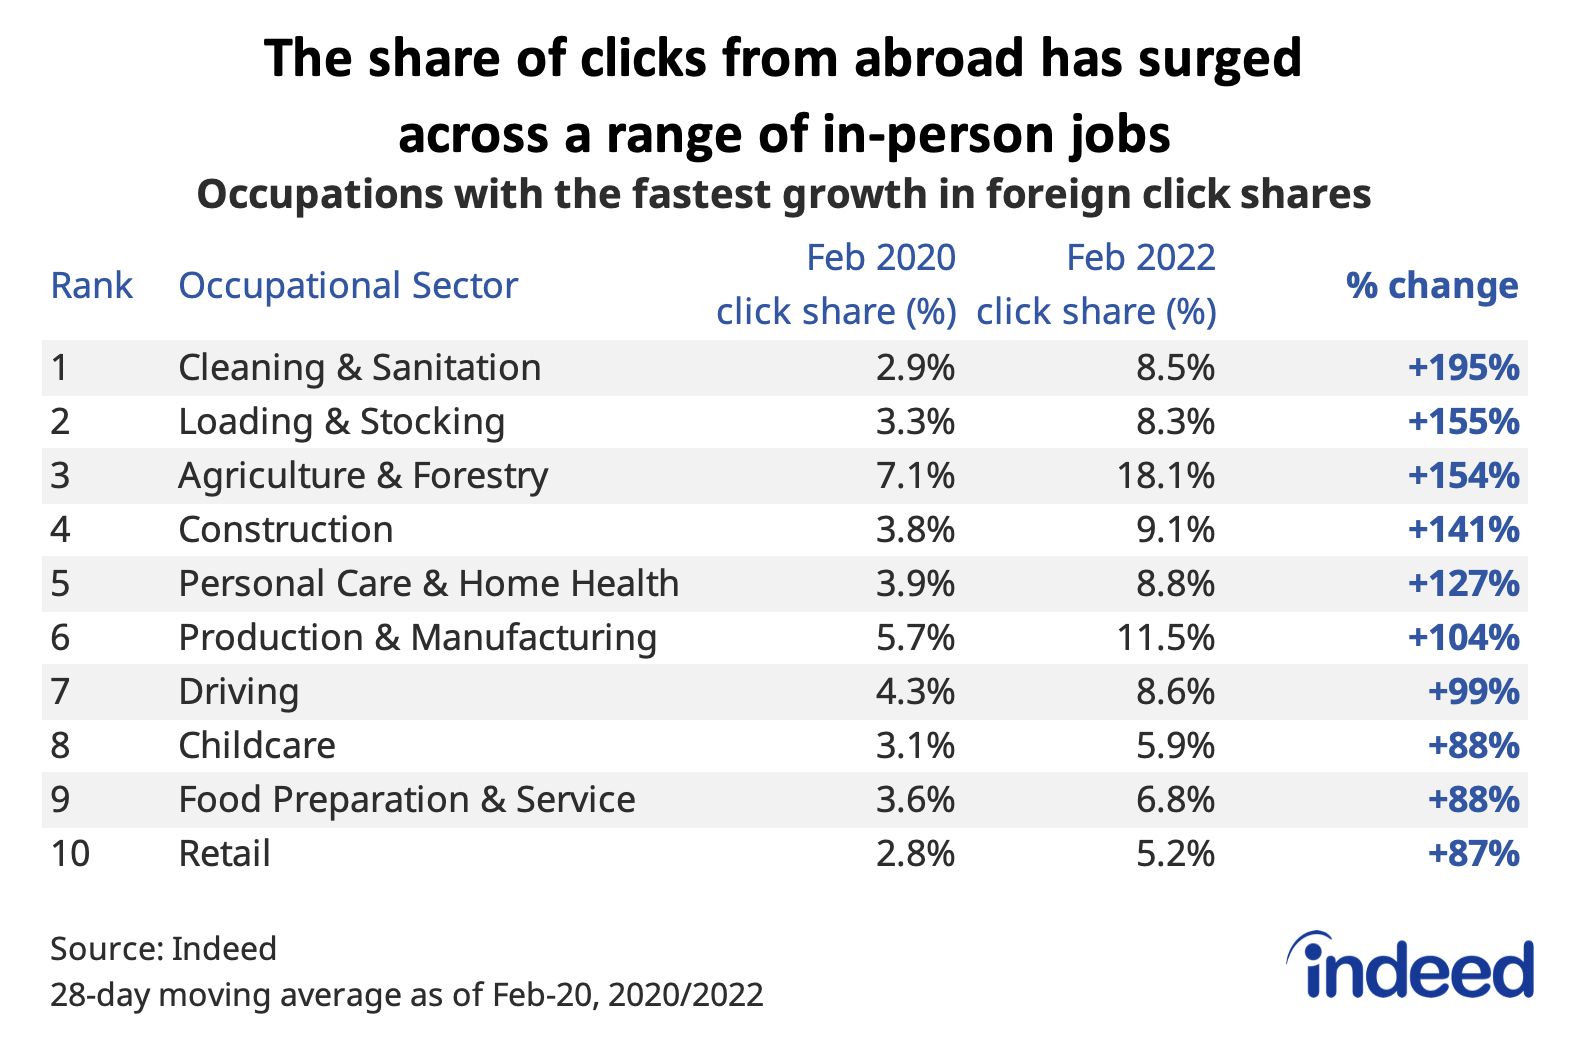 Table titled “The share of clicks from abroad has surged across a range of in-person jobs.”